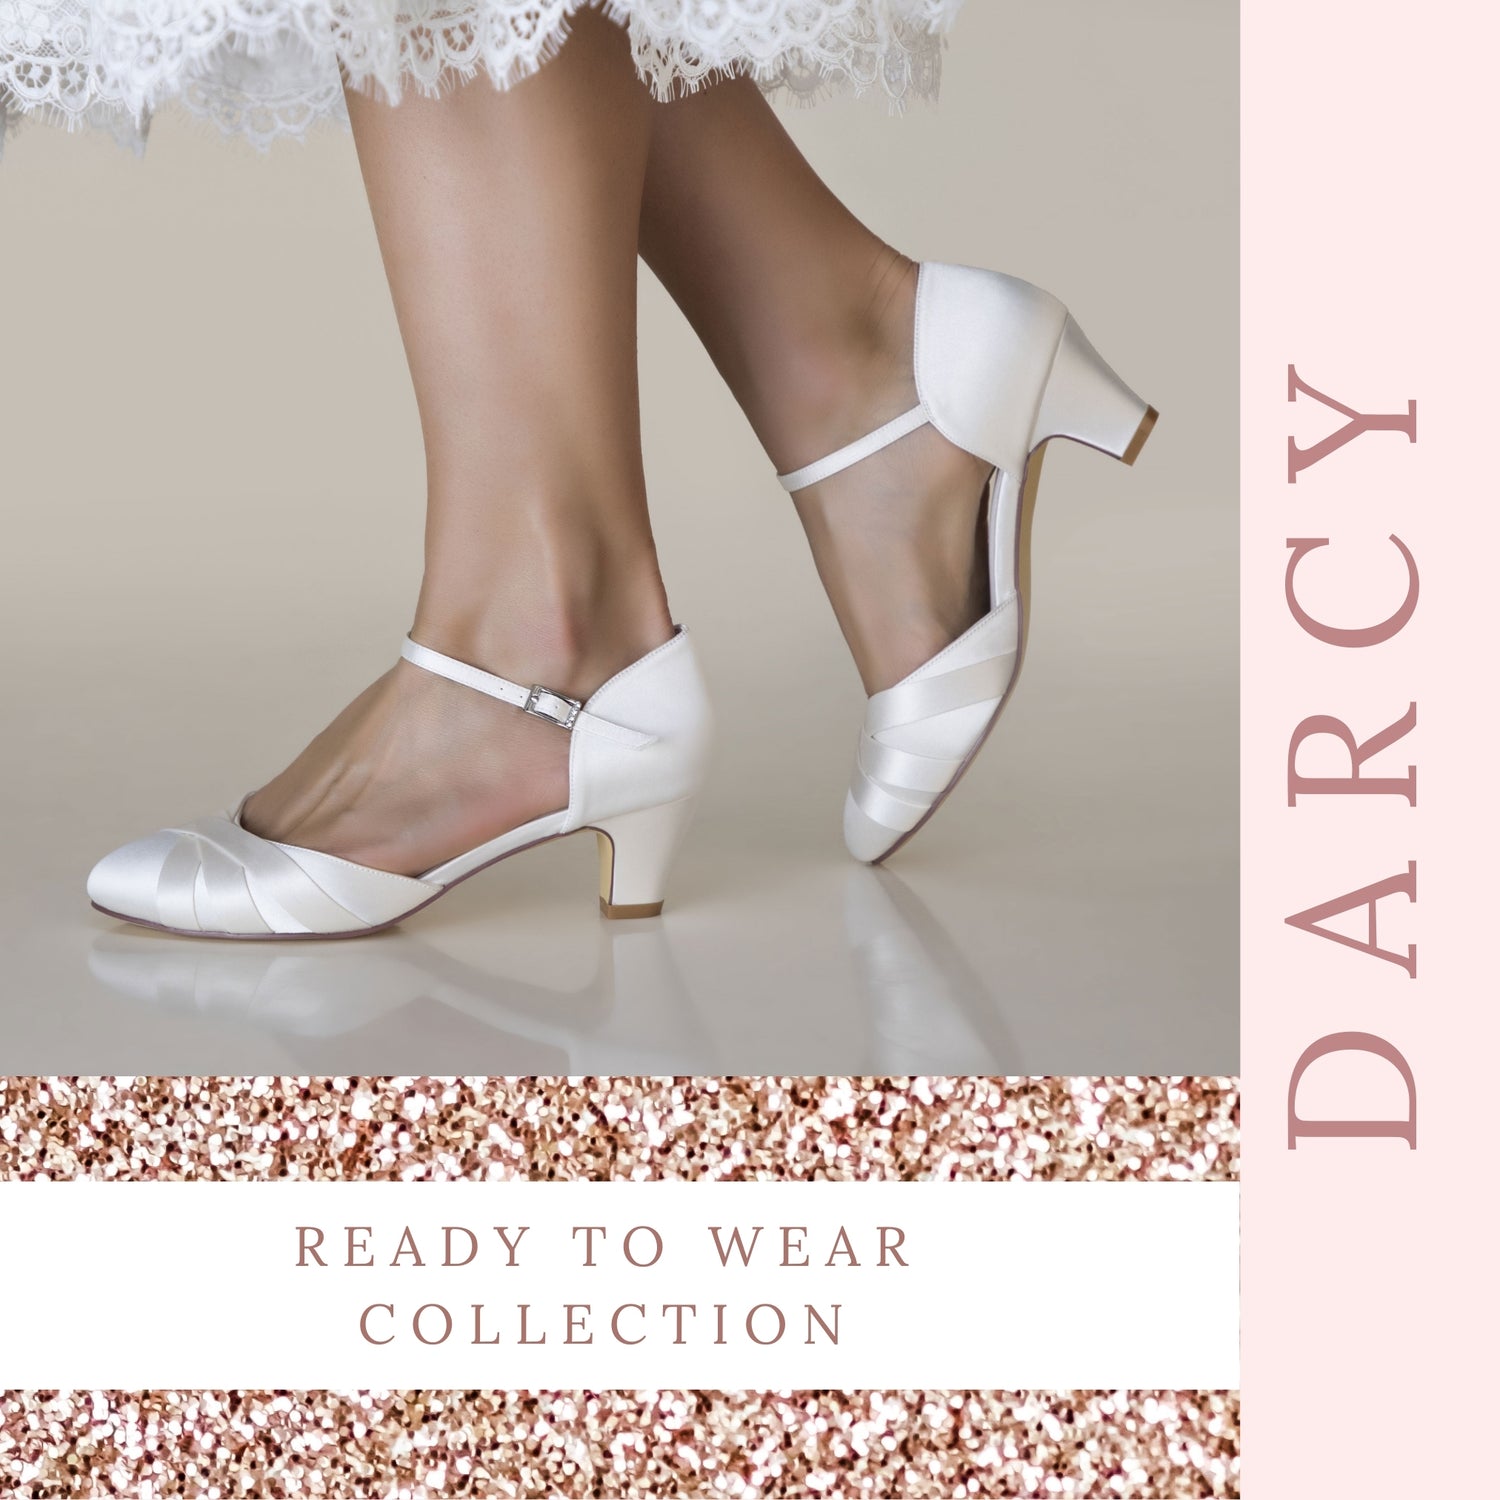 comfortable-wedding-shoes-to-wear-to-a-wedding